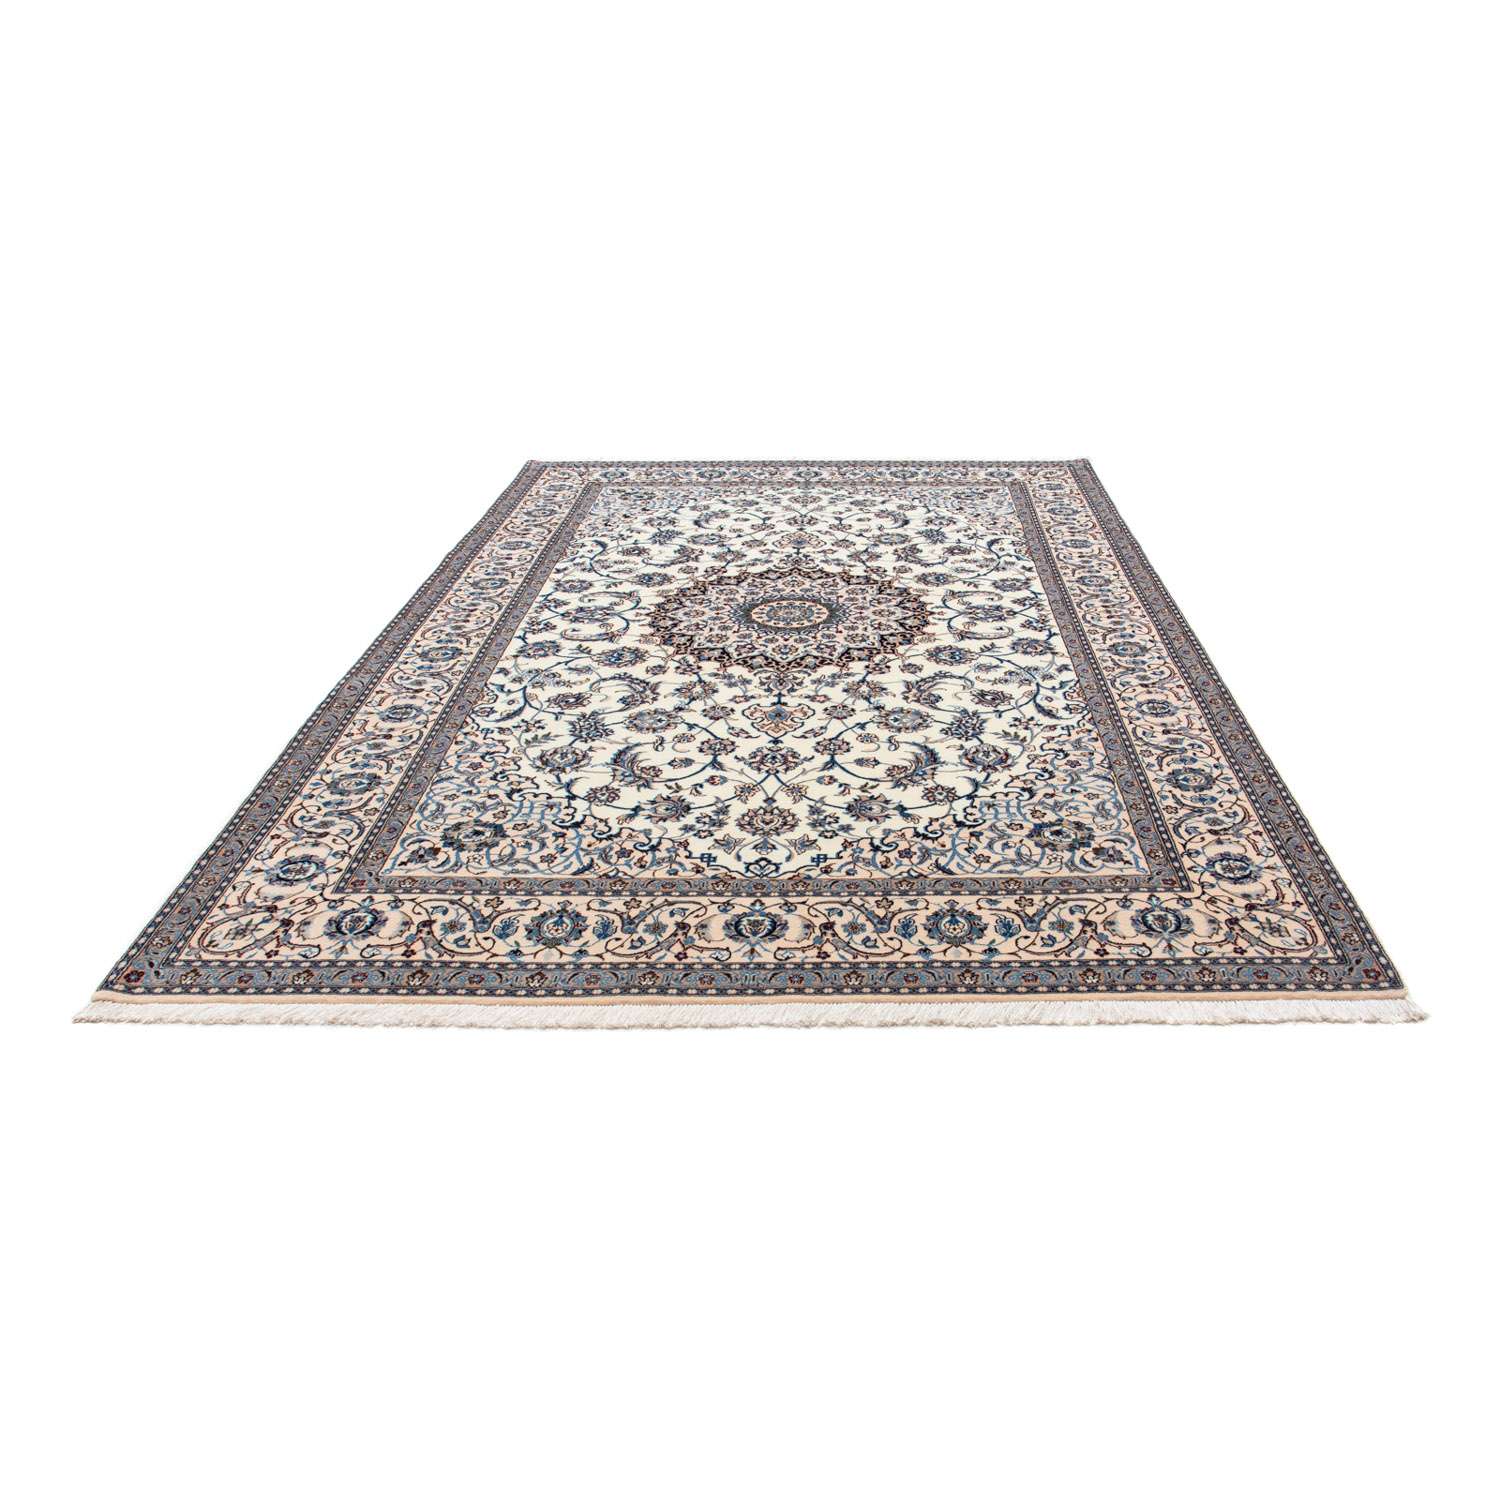 Persisk tæppe - Nain - Royal - 300 x 208 cm - beige